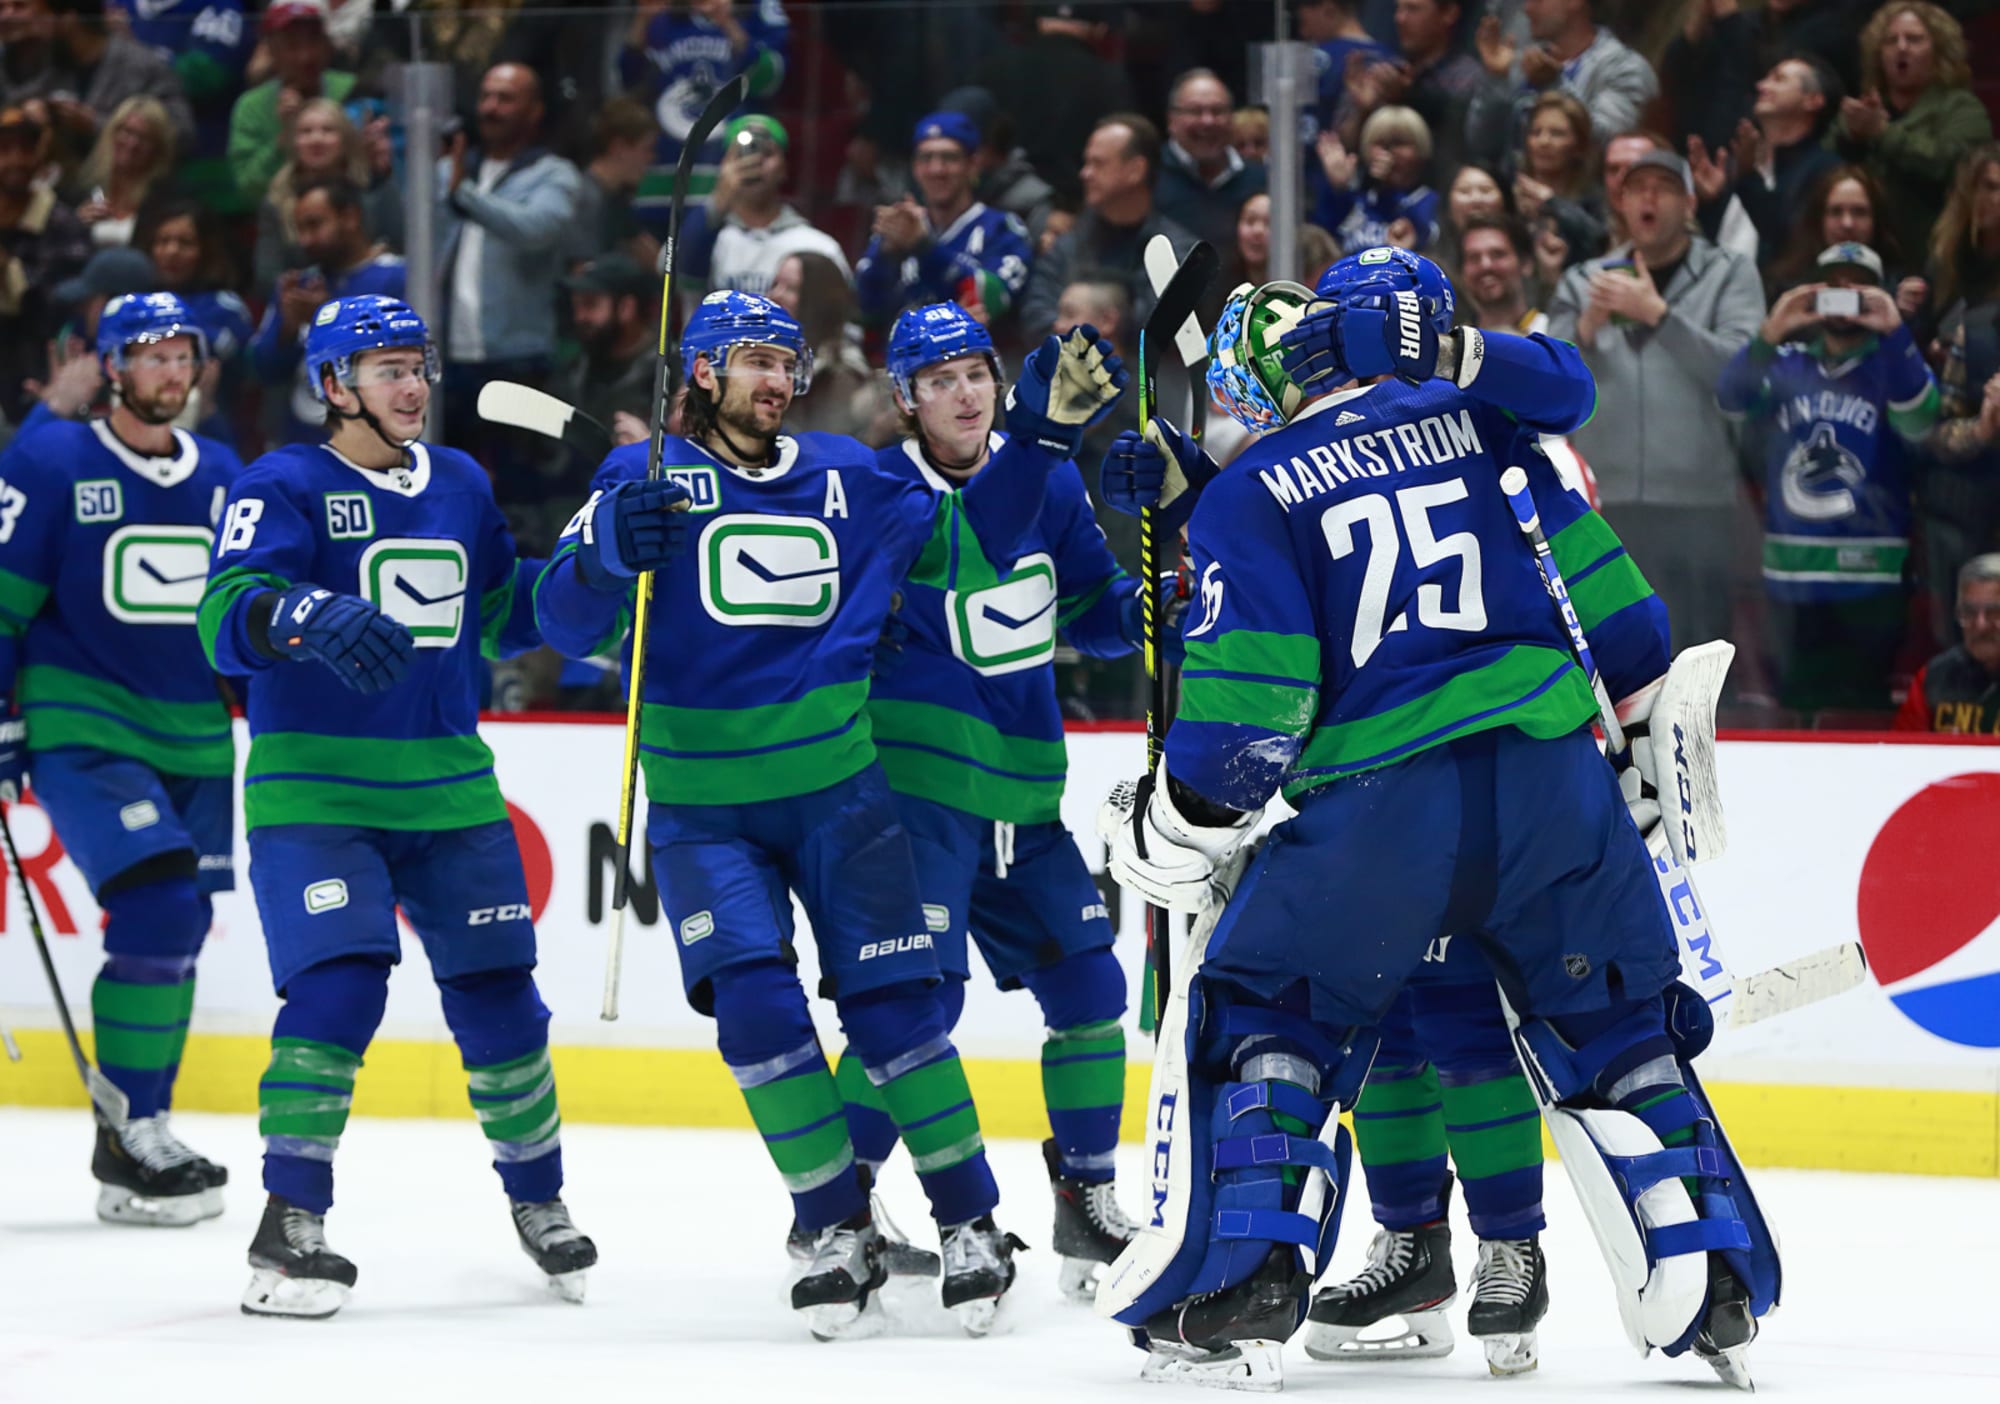 Full Vancouver Canucks Alternate Jersey Game Schedule